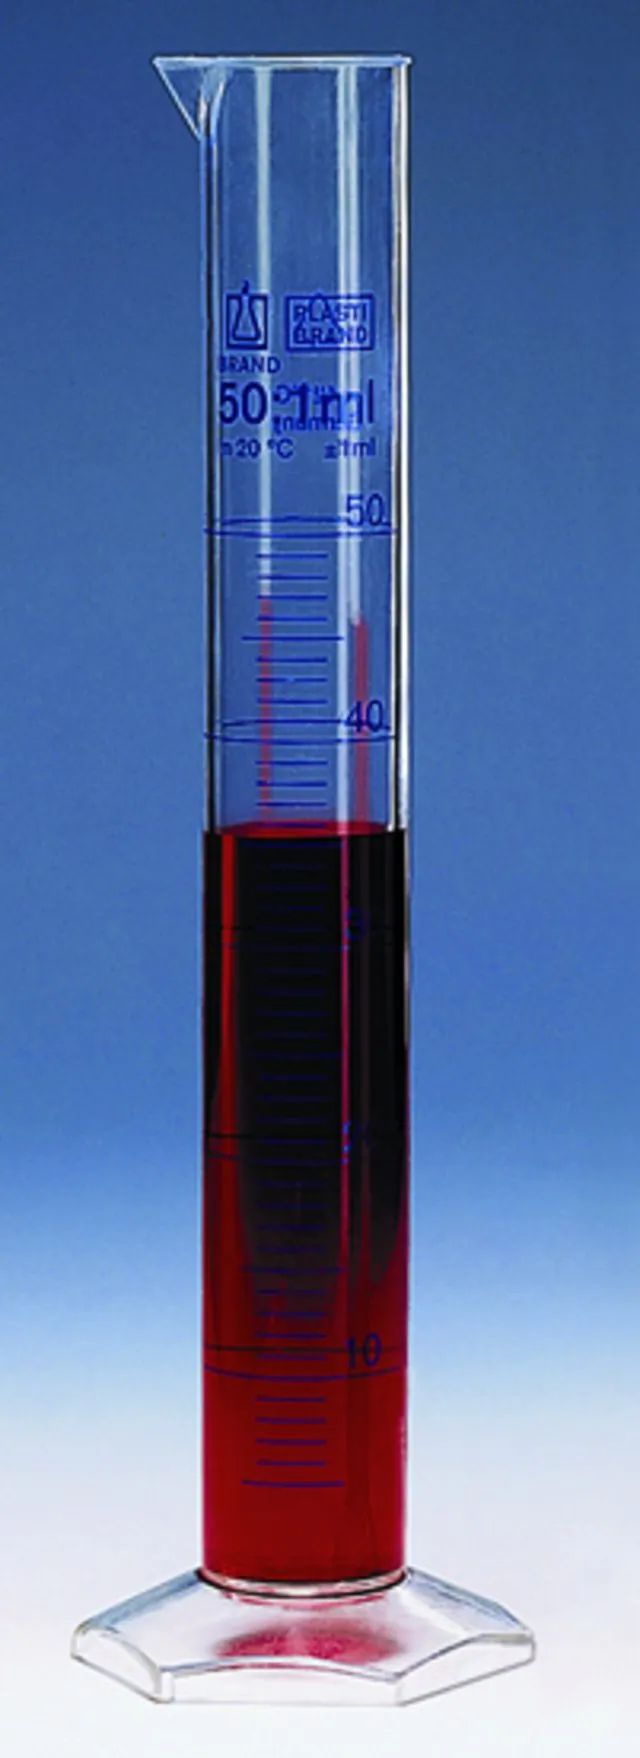 BRAND<sup>?</sup> graduated cylinder, PMP